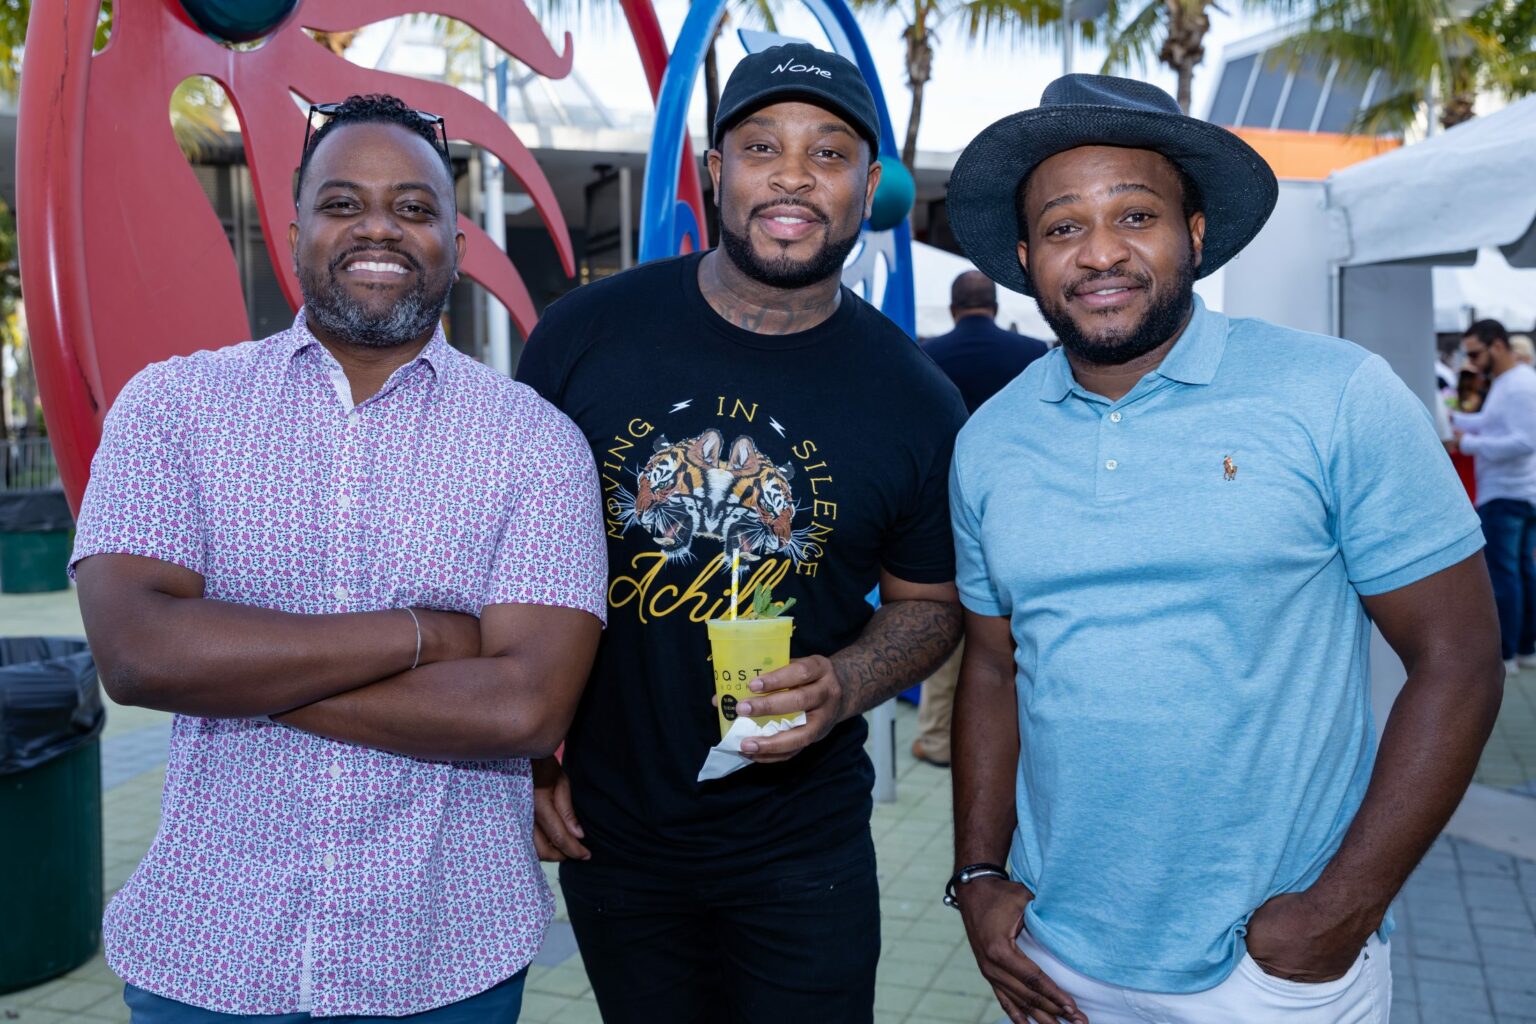 Creole Food Festival founders with Pleasure P